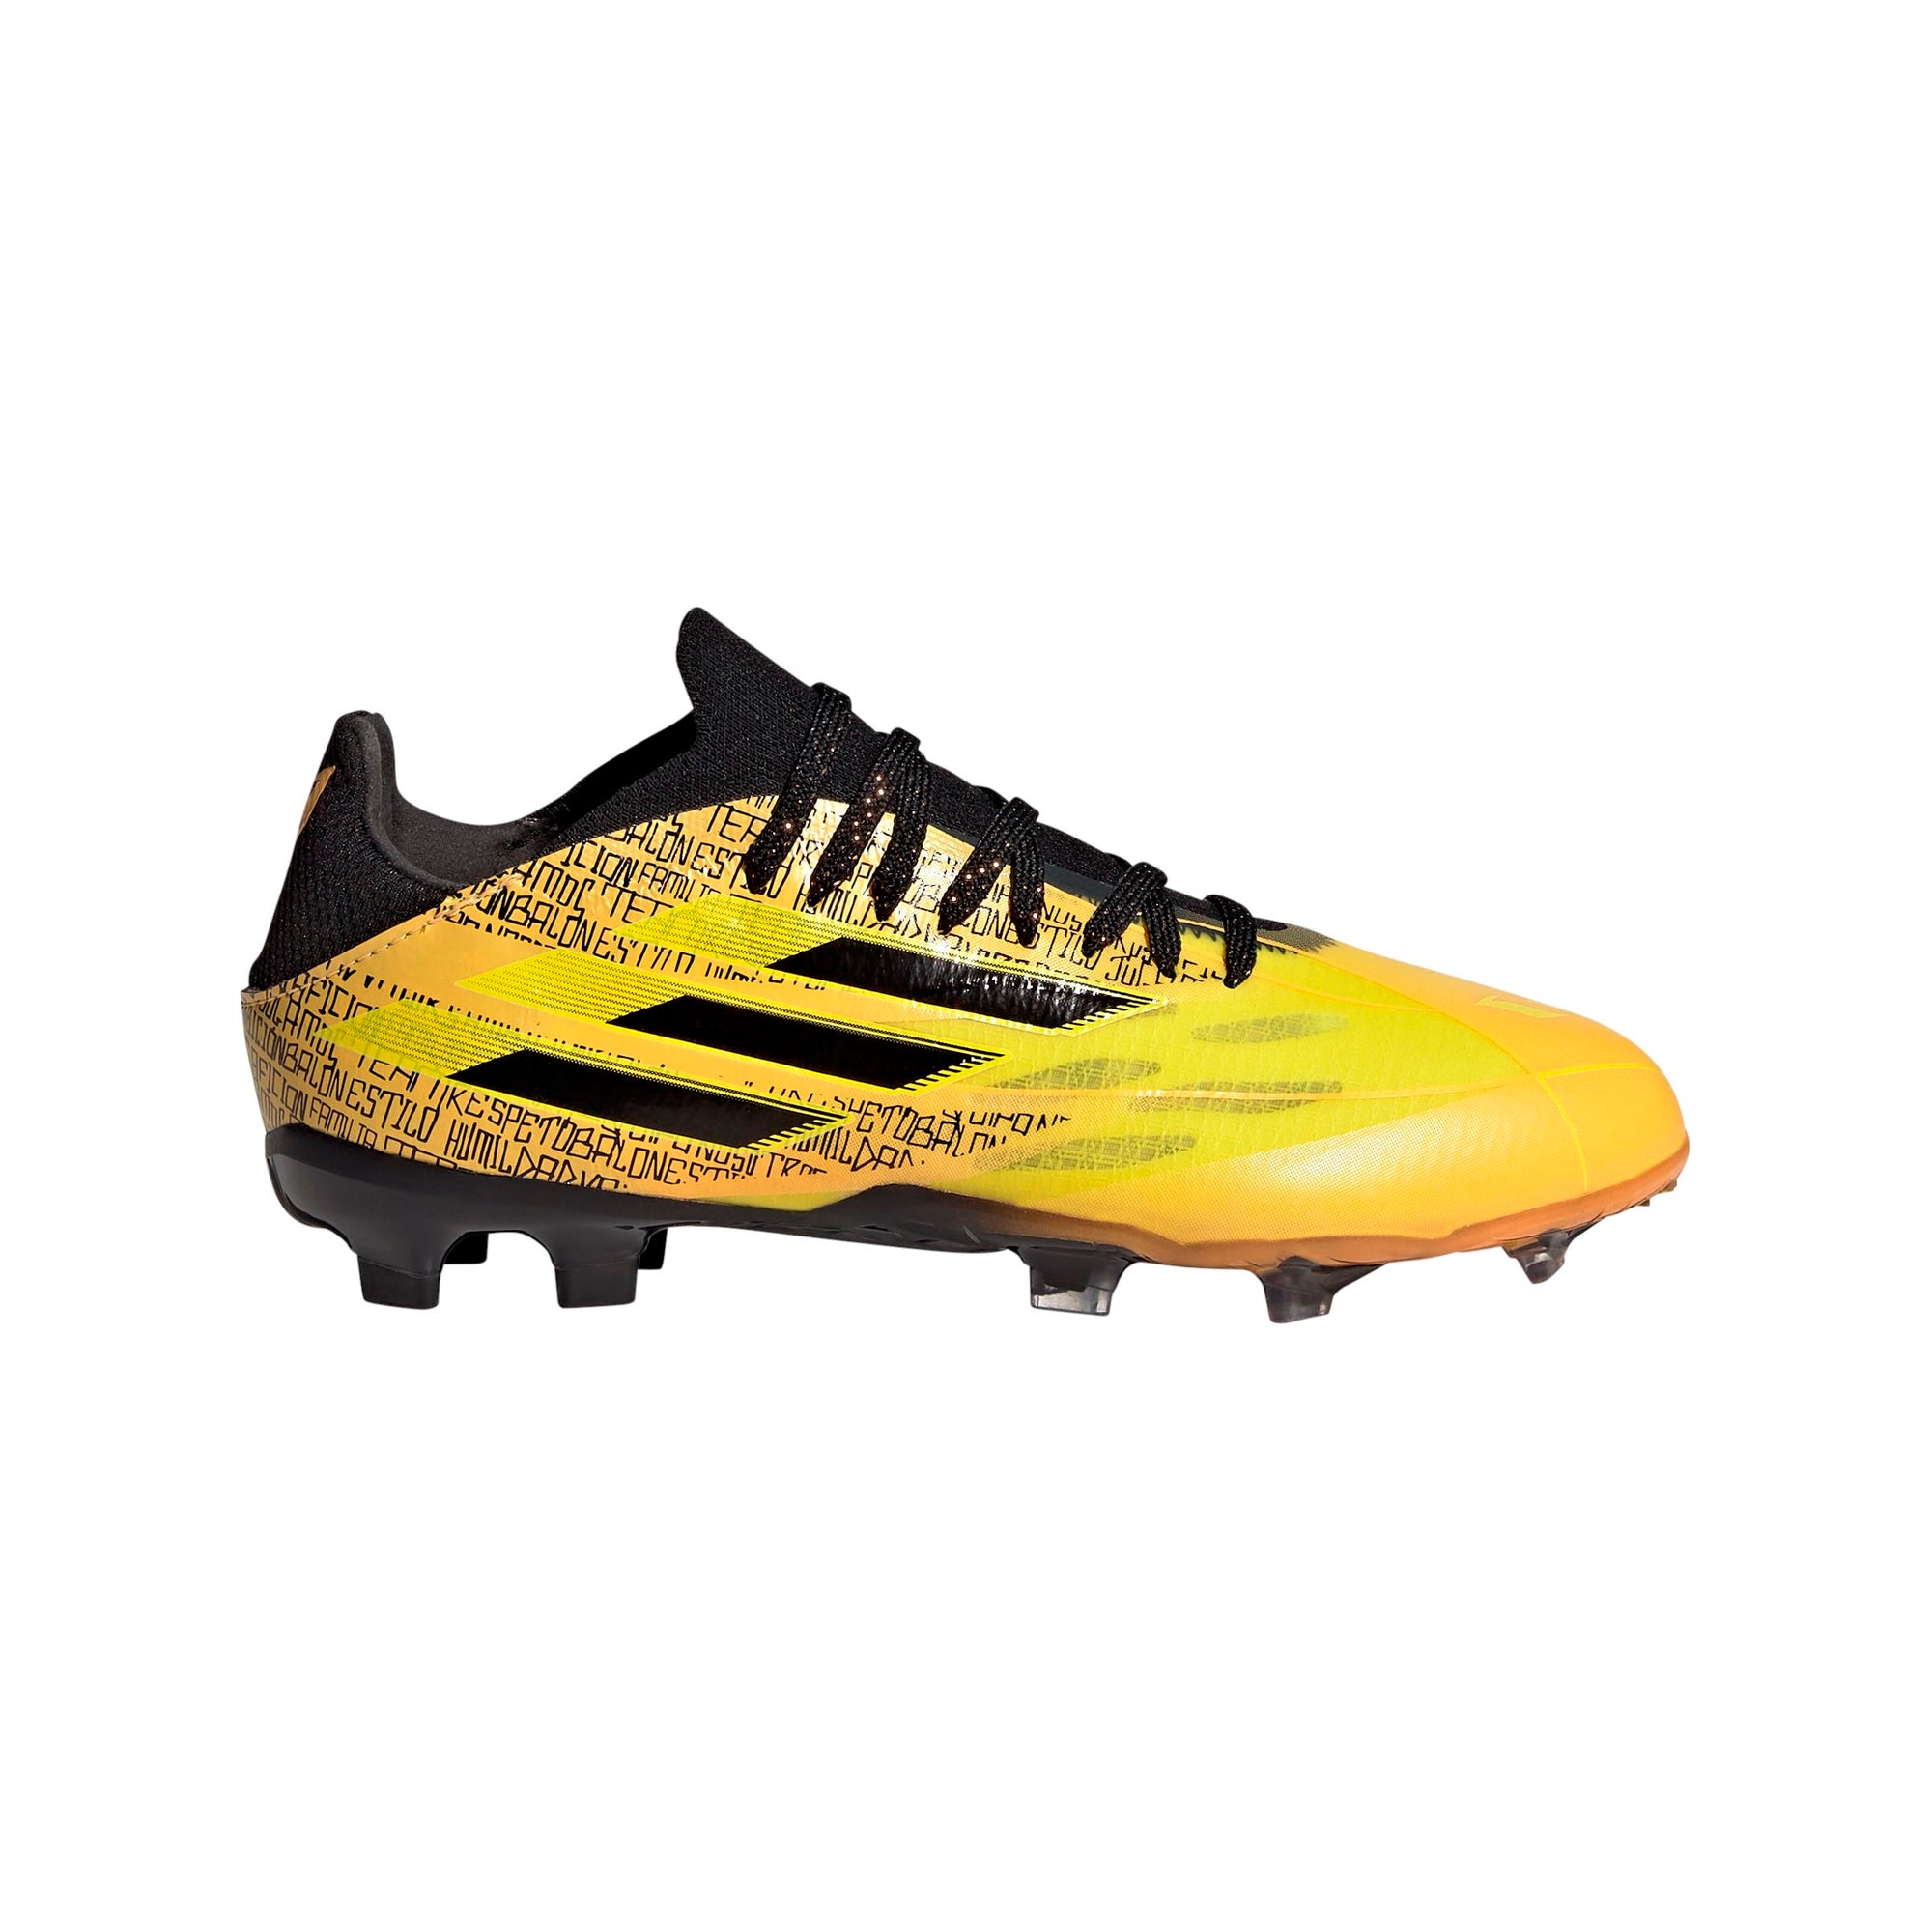 adidas Youth X Speedflow Messi.1 Firm Ground Cleats | GW7418 Cleats Adidas 1 Solar Gold / Core Black / Bright Yellow 